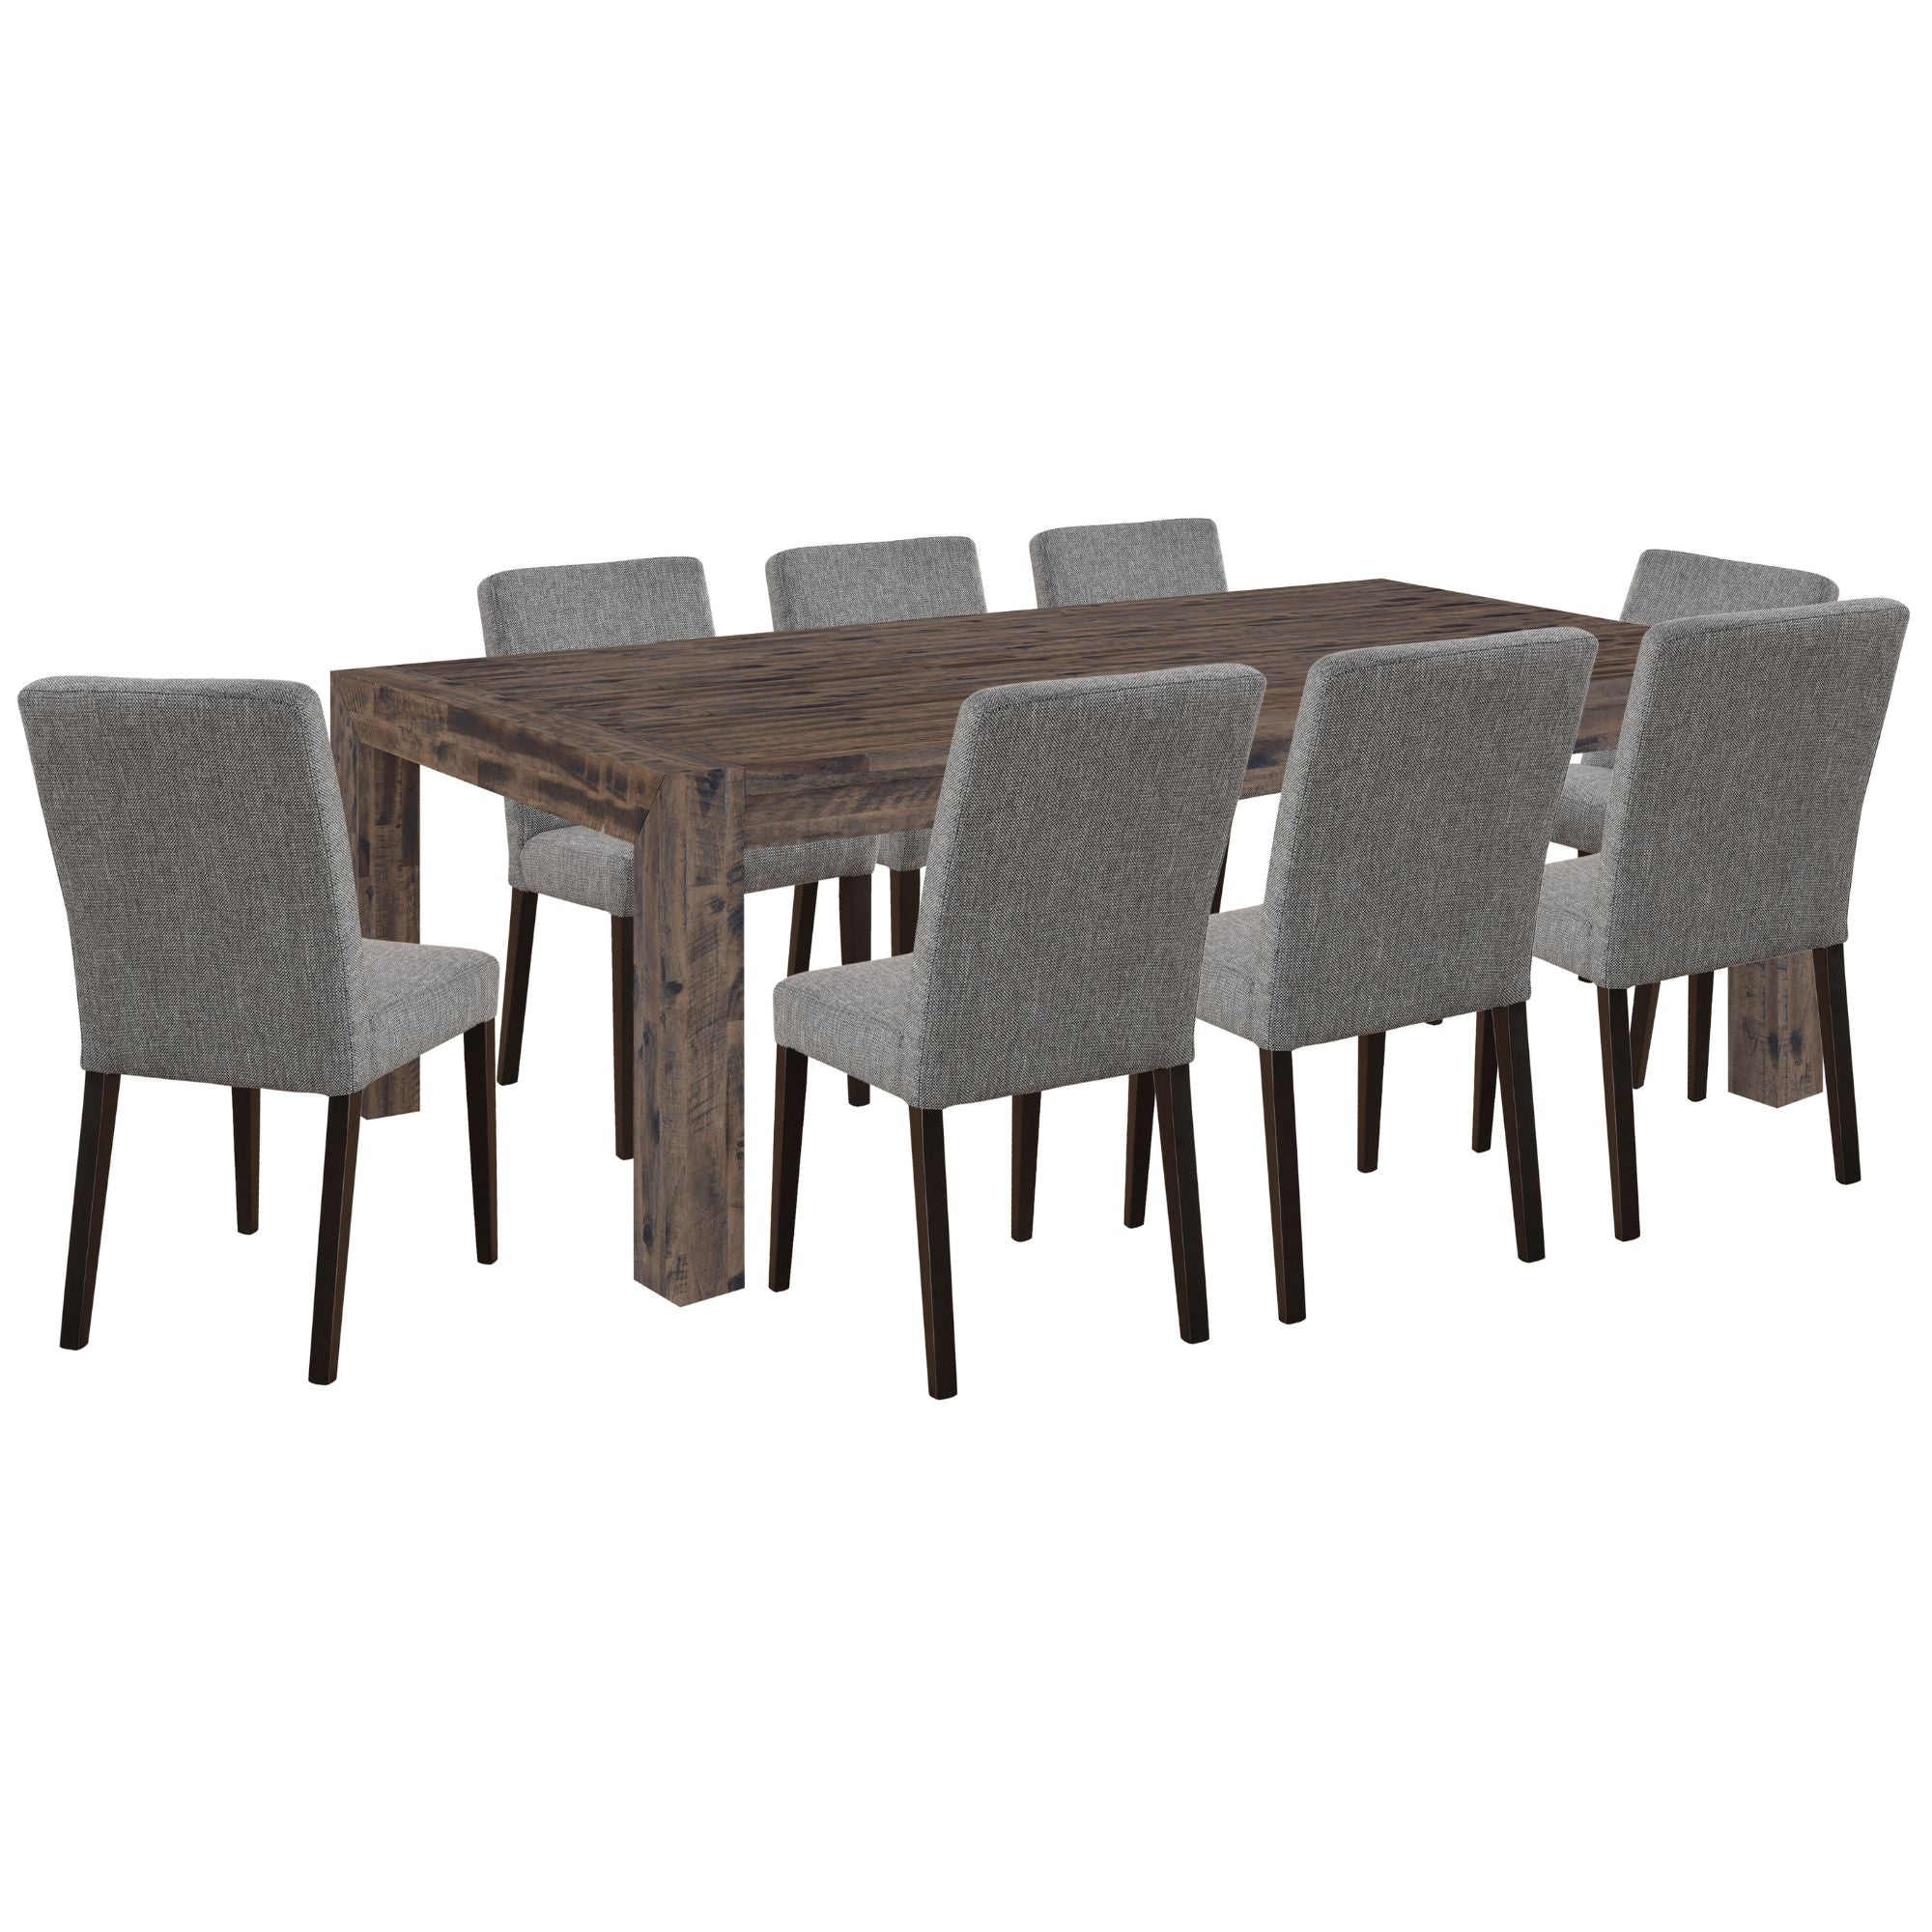 Catmint 9pc Dining Set 210cm Table with 8 Solid Wood Fabric Chair - SILBERSHELL